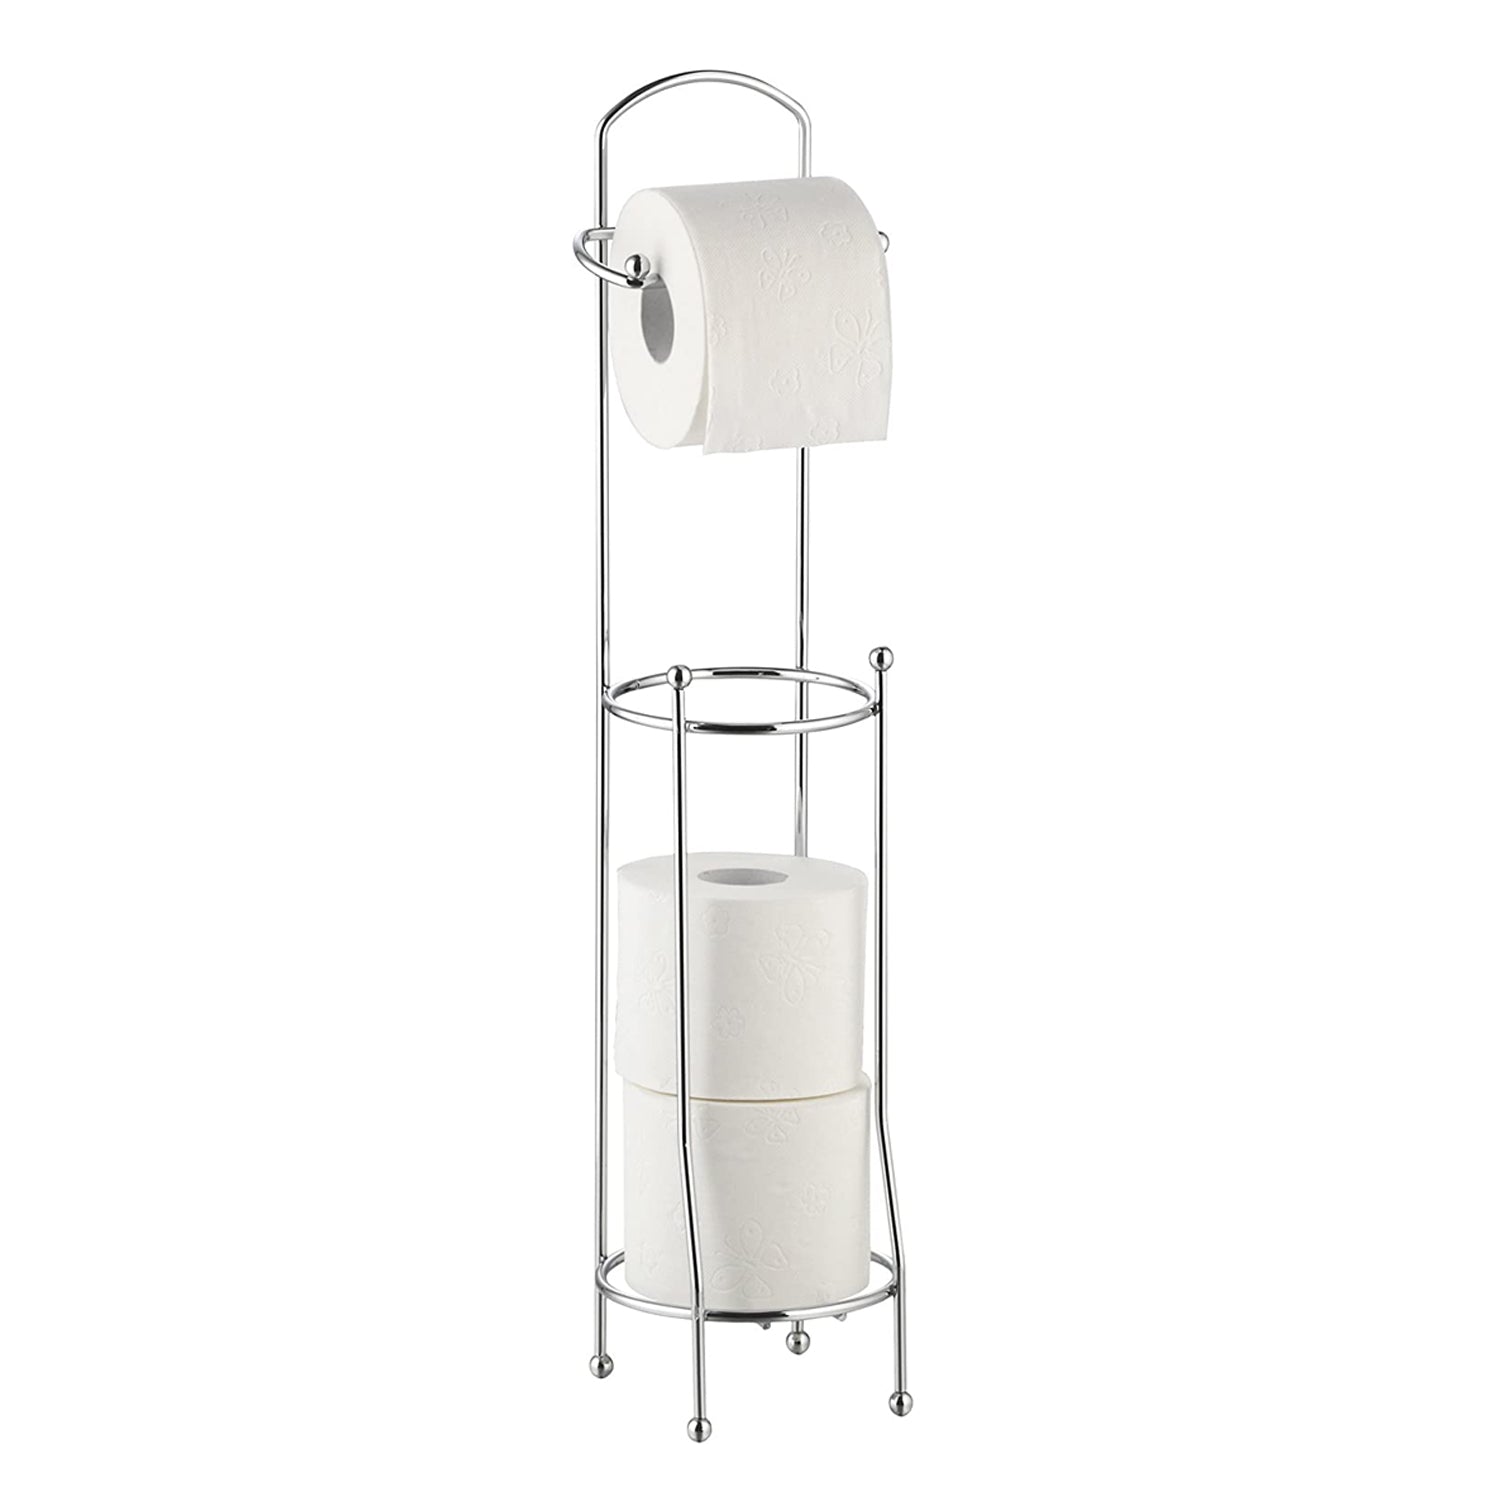 5199 Tissue Roll Stand 63cm High Quality Steel Stand Foe Toilet & Home Use Stand